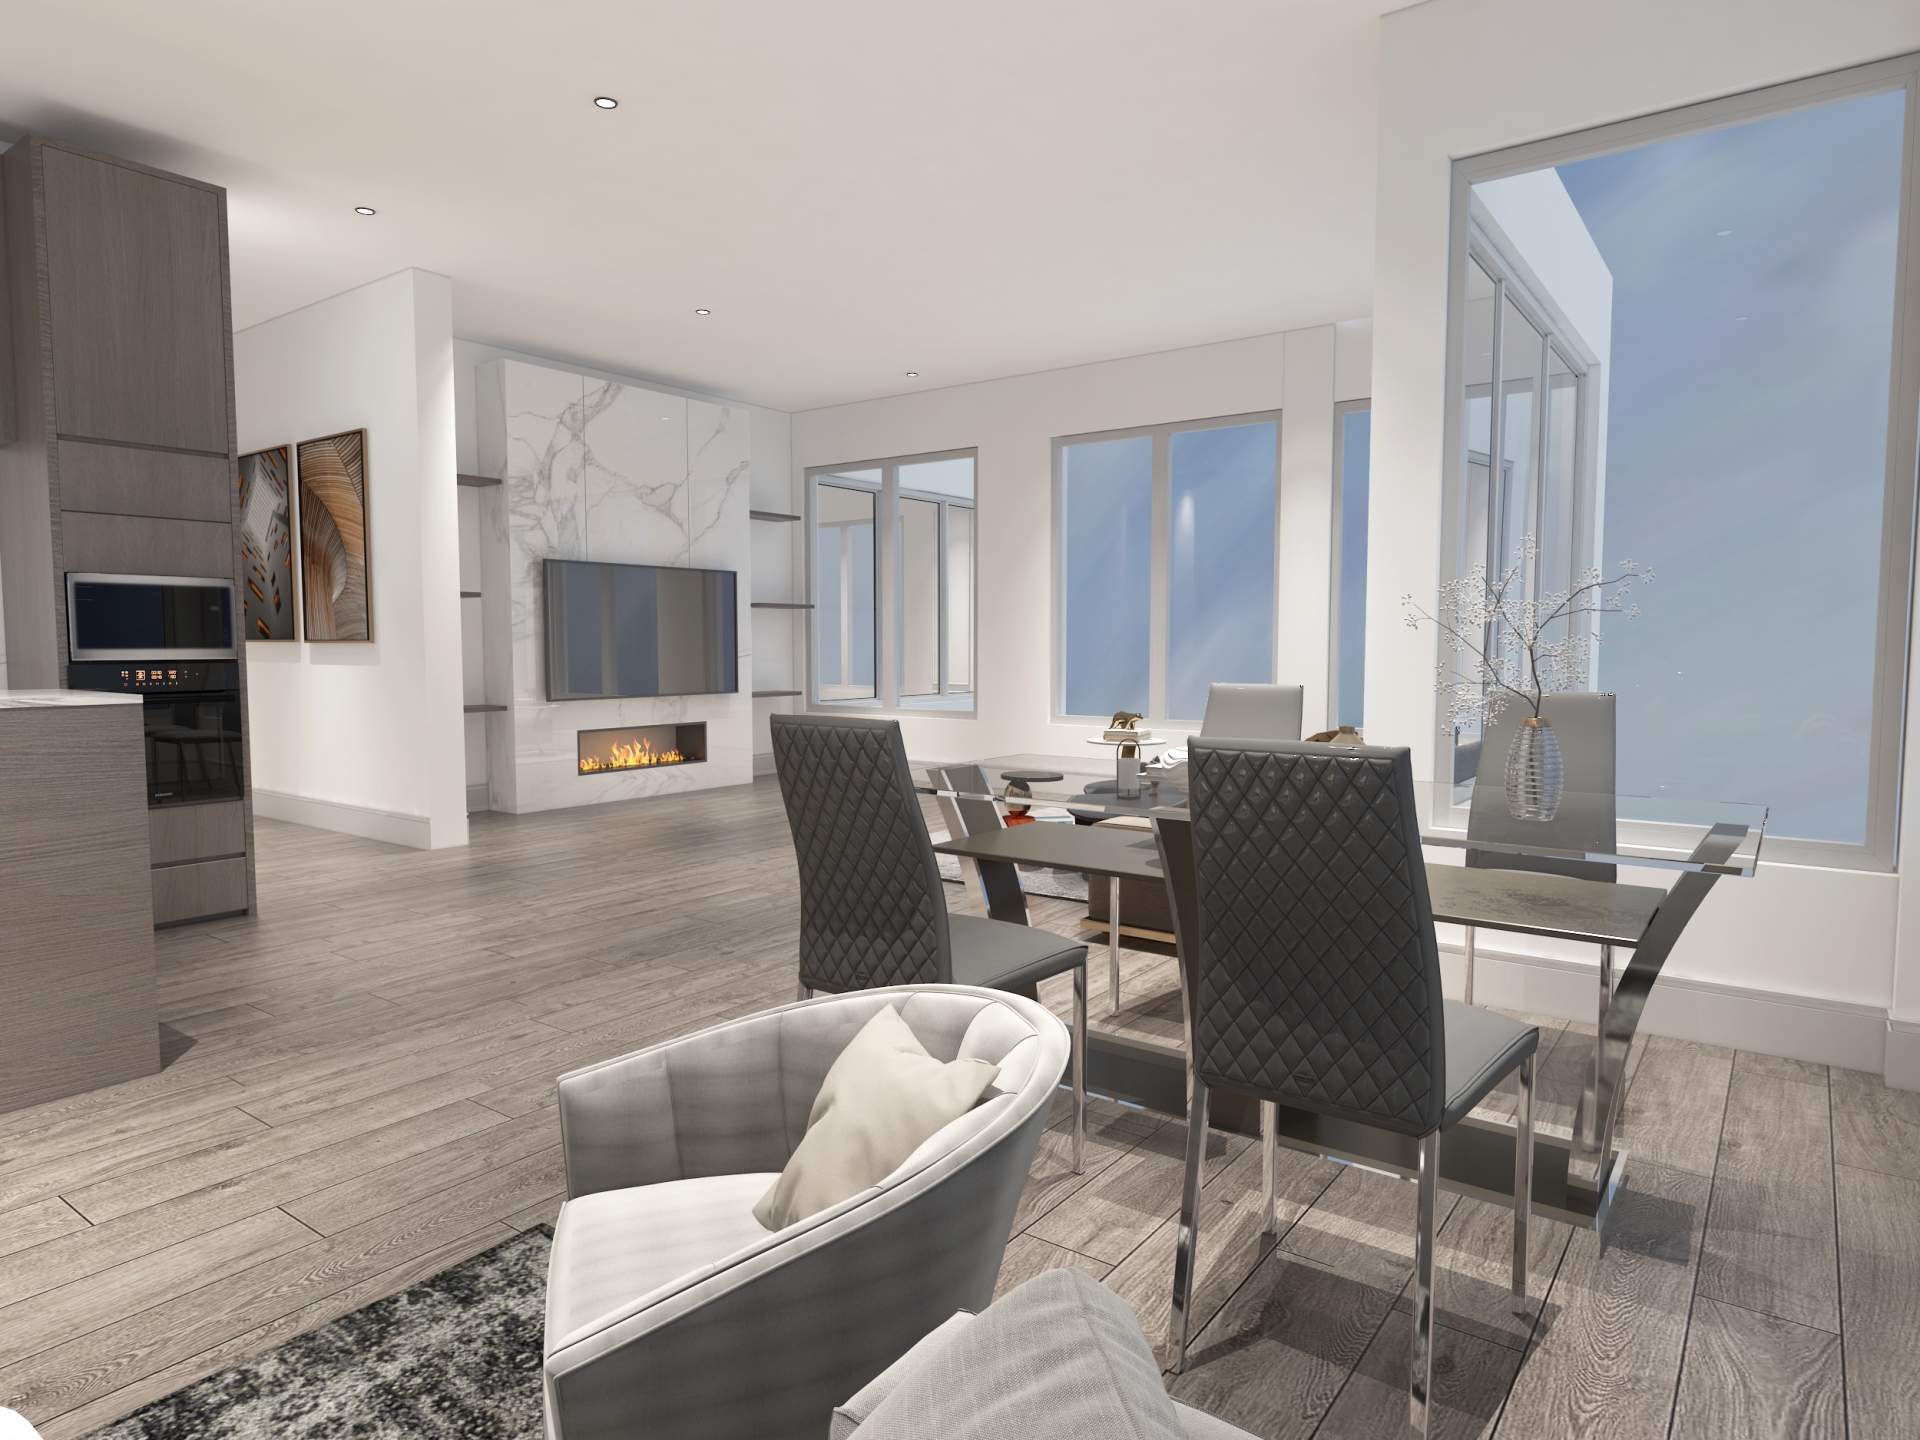 With large, open concept interiors, these are Langley's first "homes in the sky".